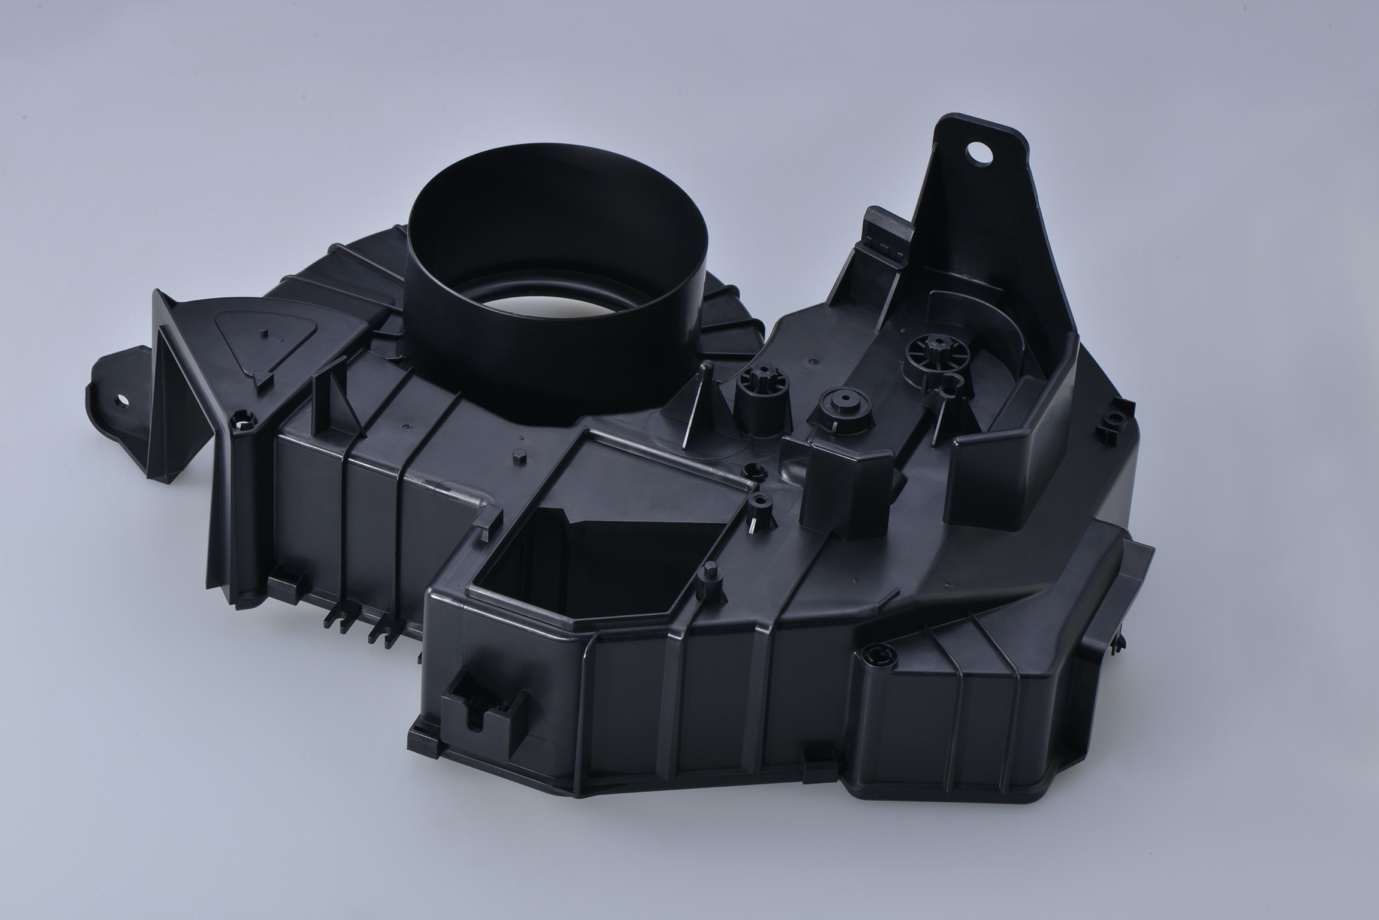 A part made by the process of injection molding